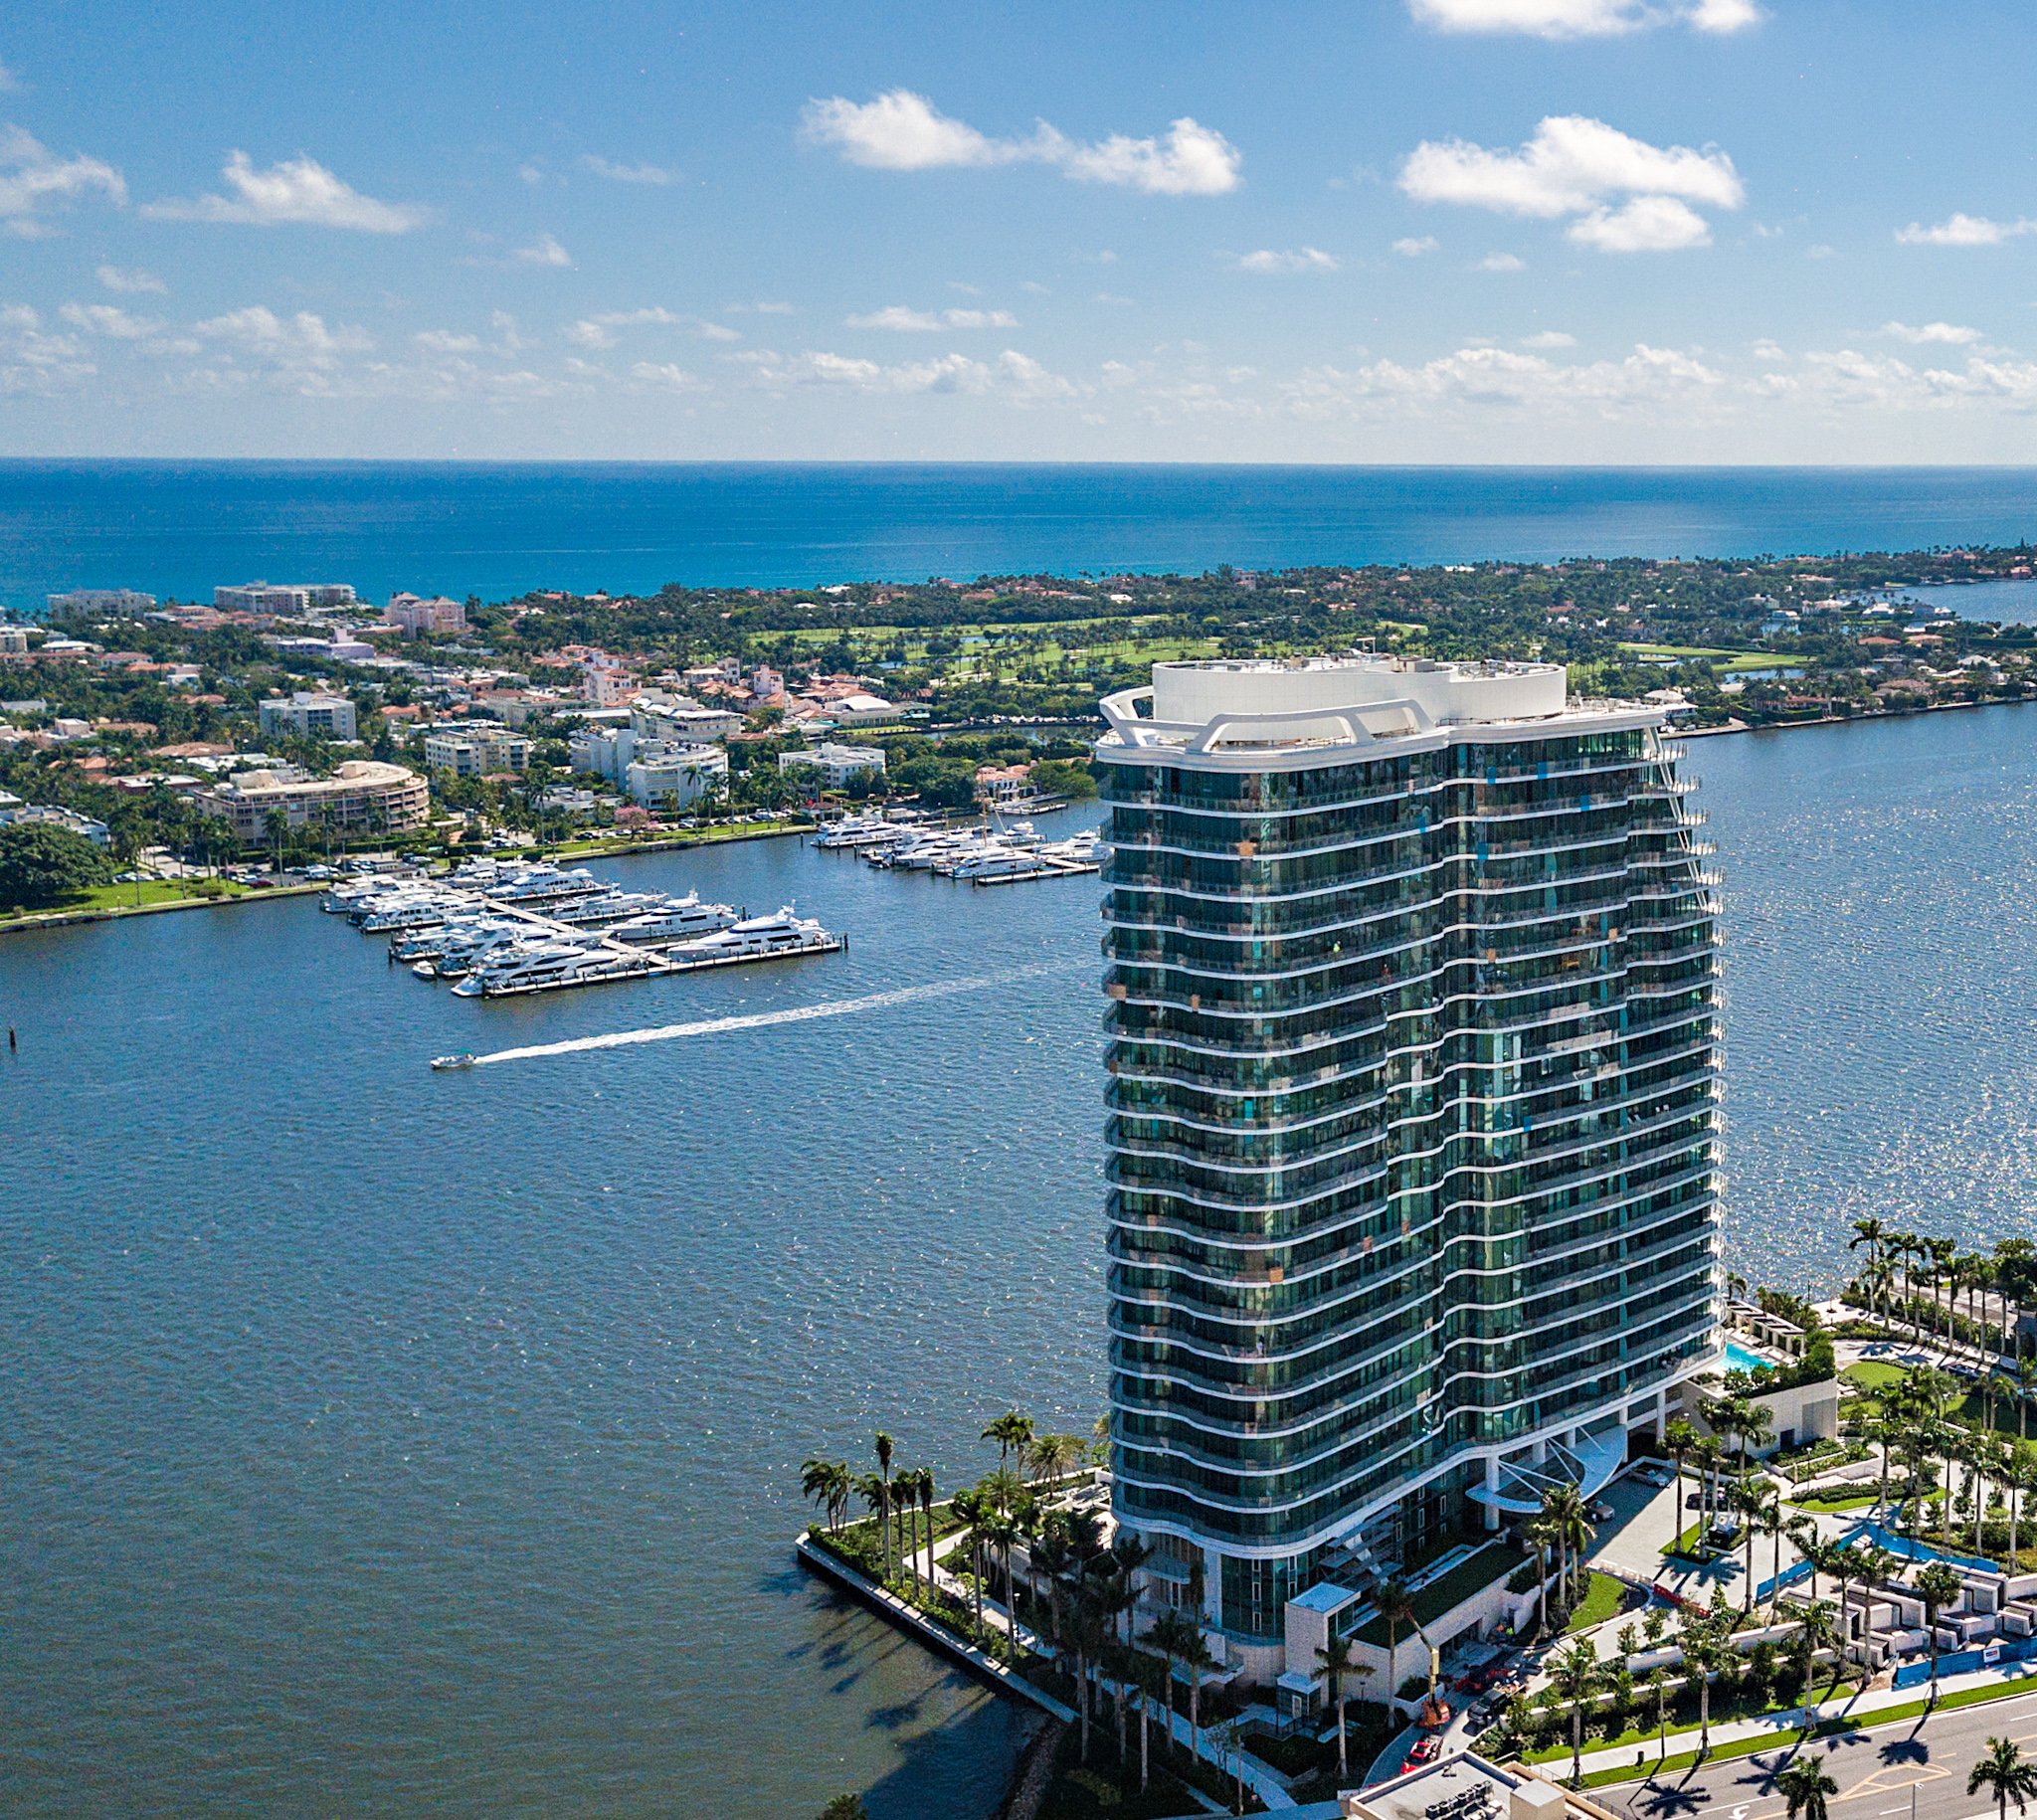 Residence At The Bristol In West Palm Beach Trades For Record $21 Million, Double Its 2019 Purchase Price 1.jpg